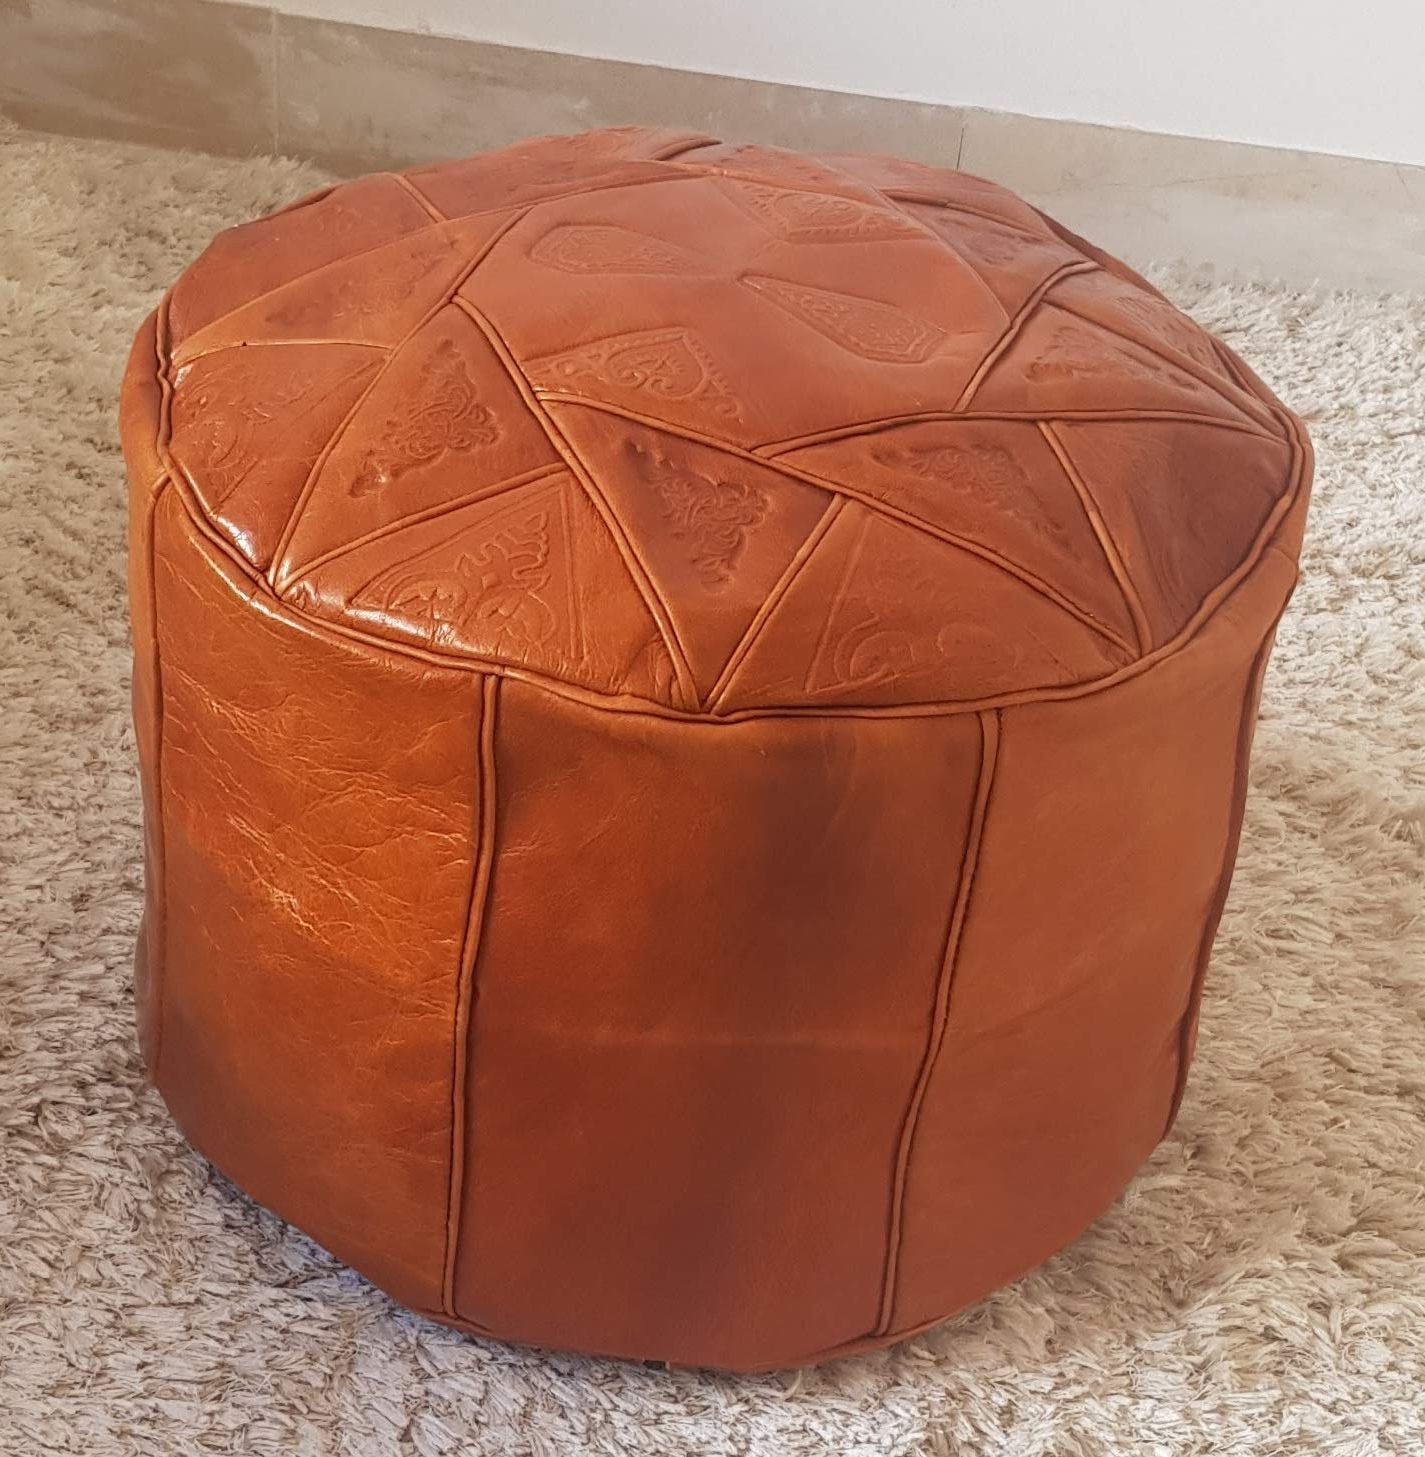 Cube Moroccan Leather Pouf, Brown (View 8 of 10)